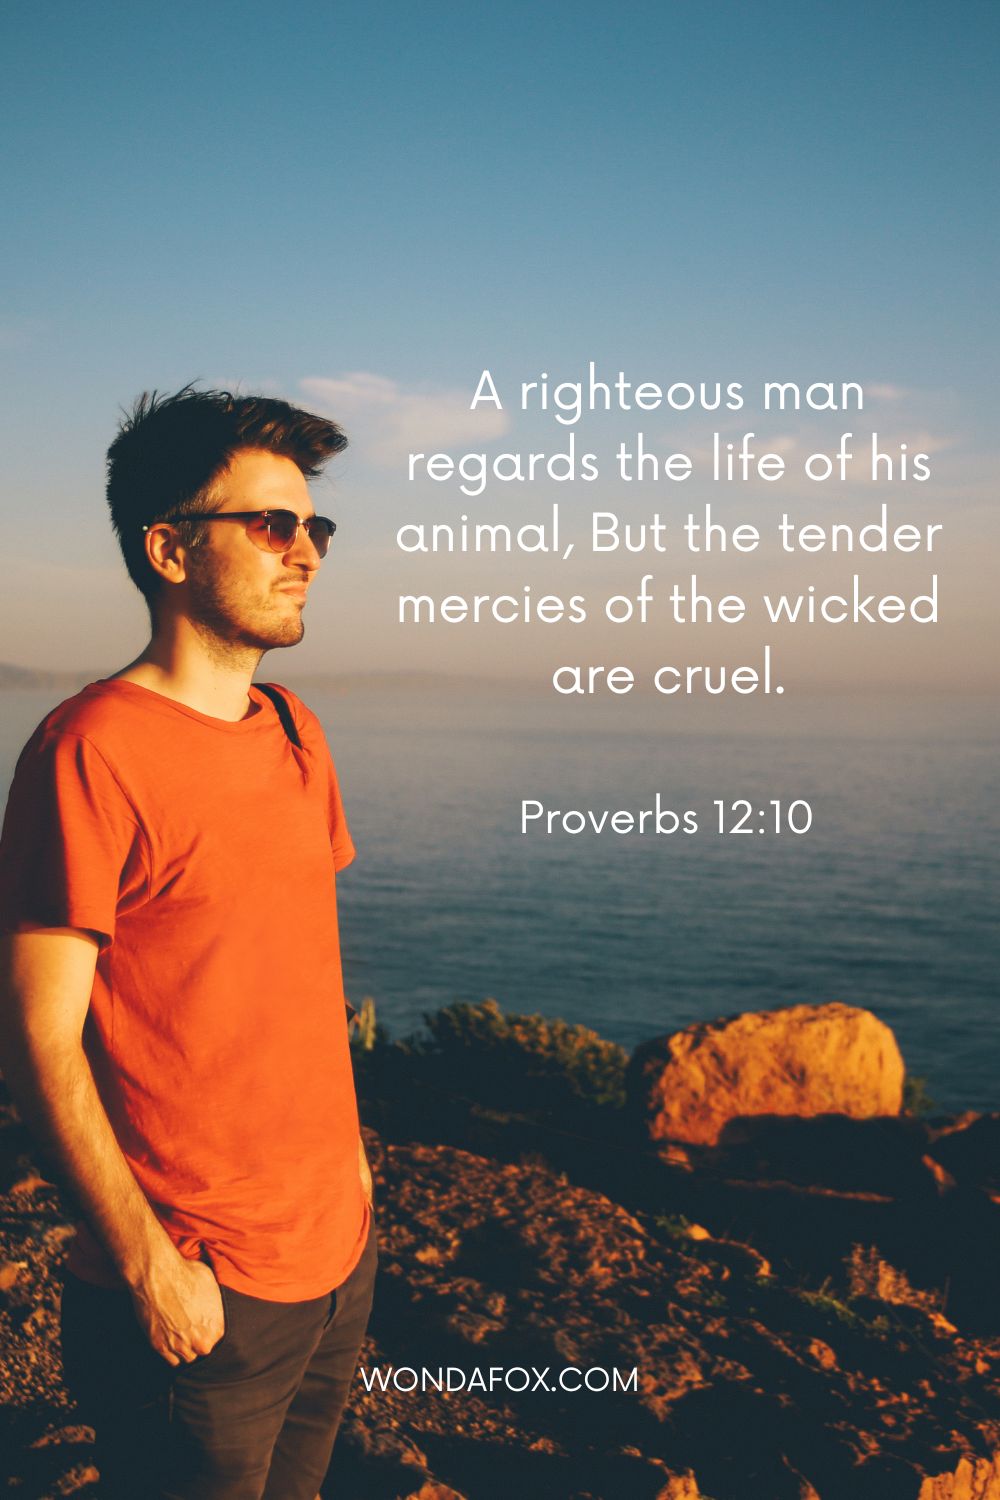 A righteous man regards the life of his animal, But the tender mercies of the wicked are cruel.